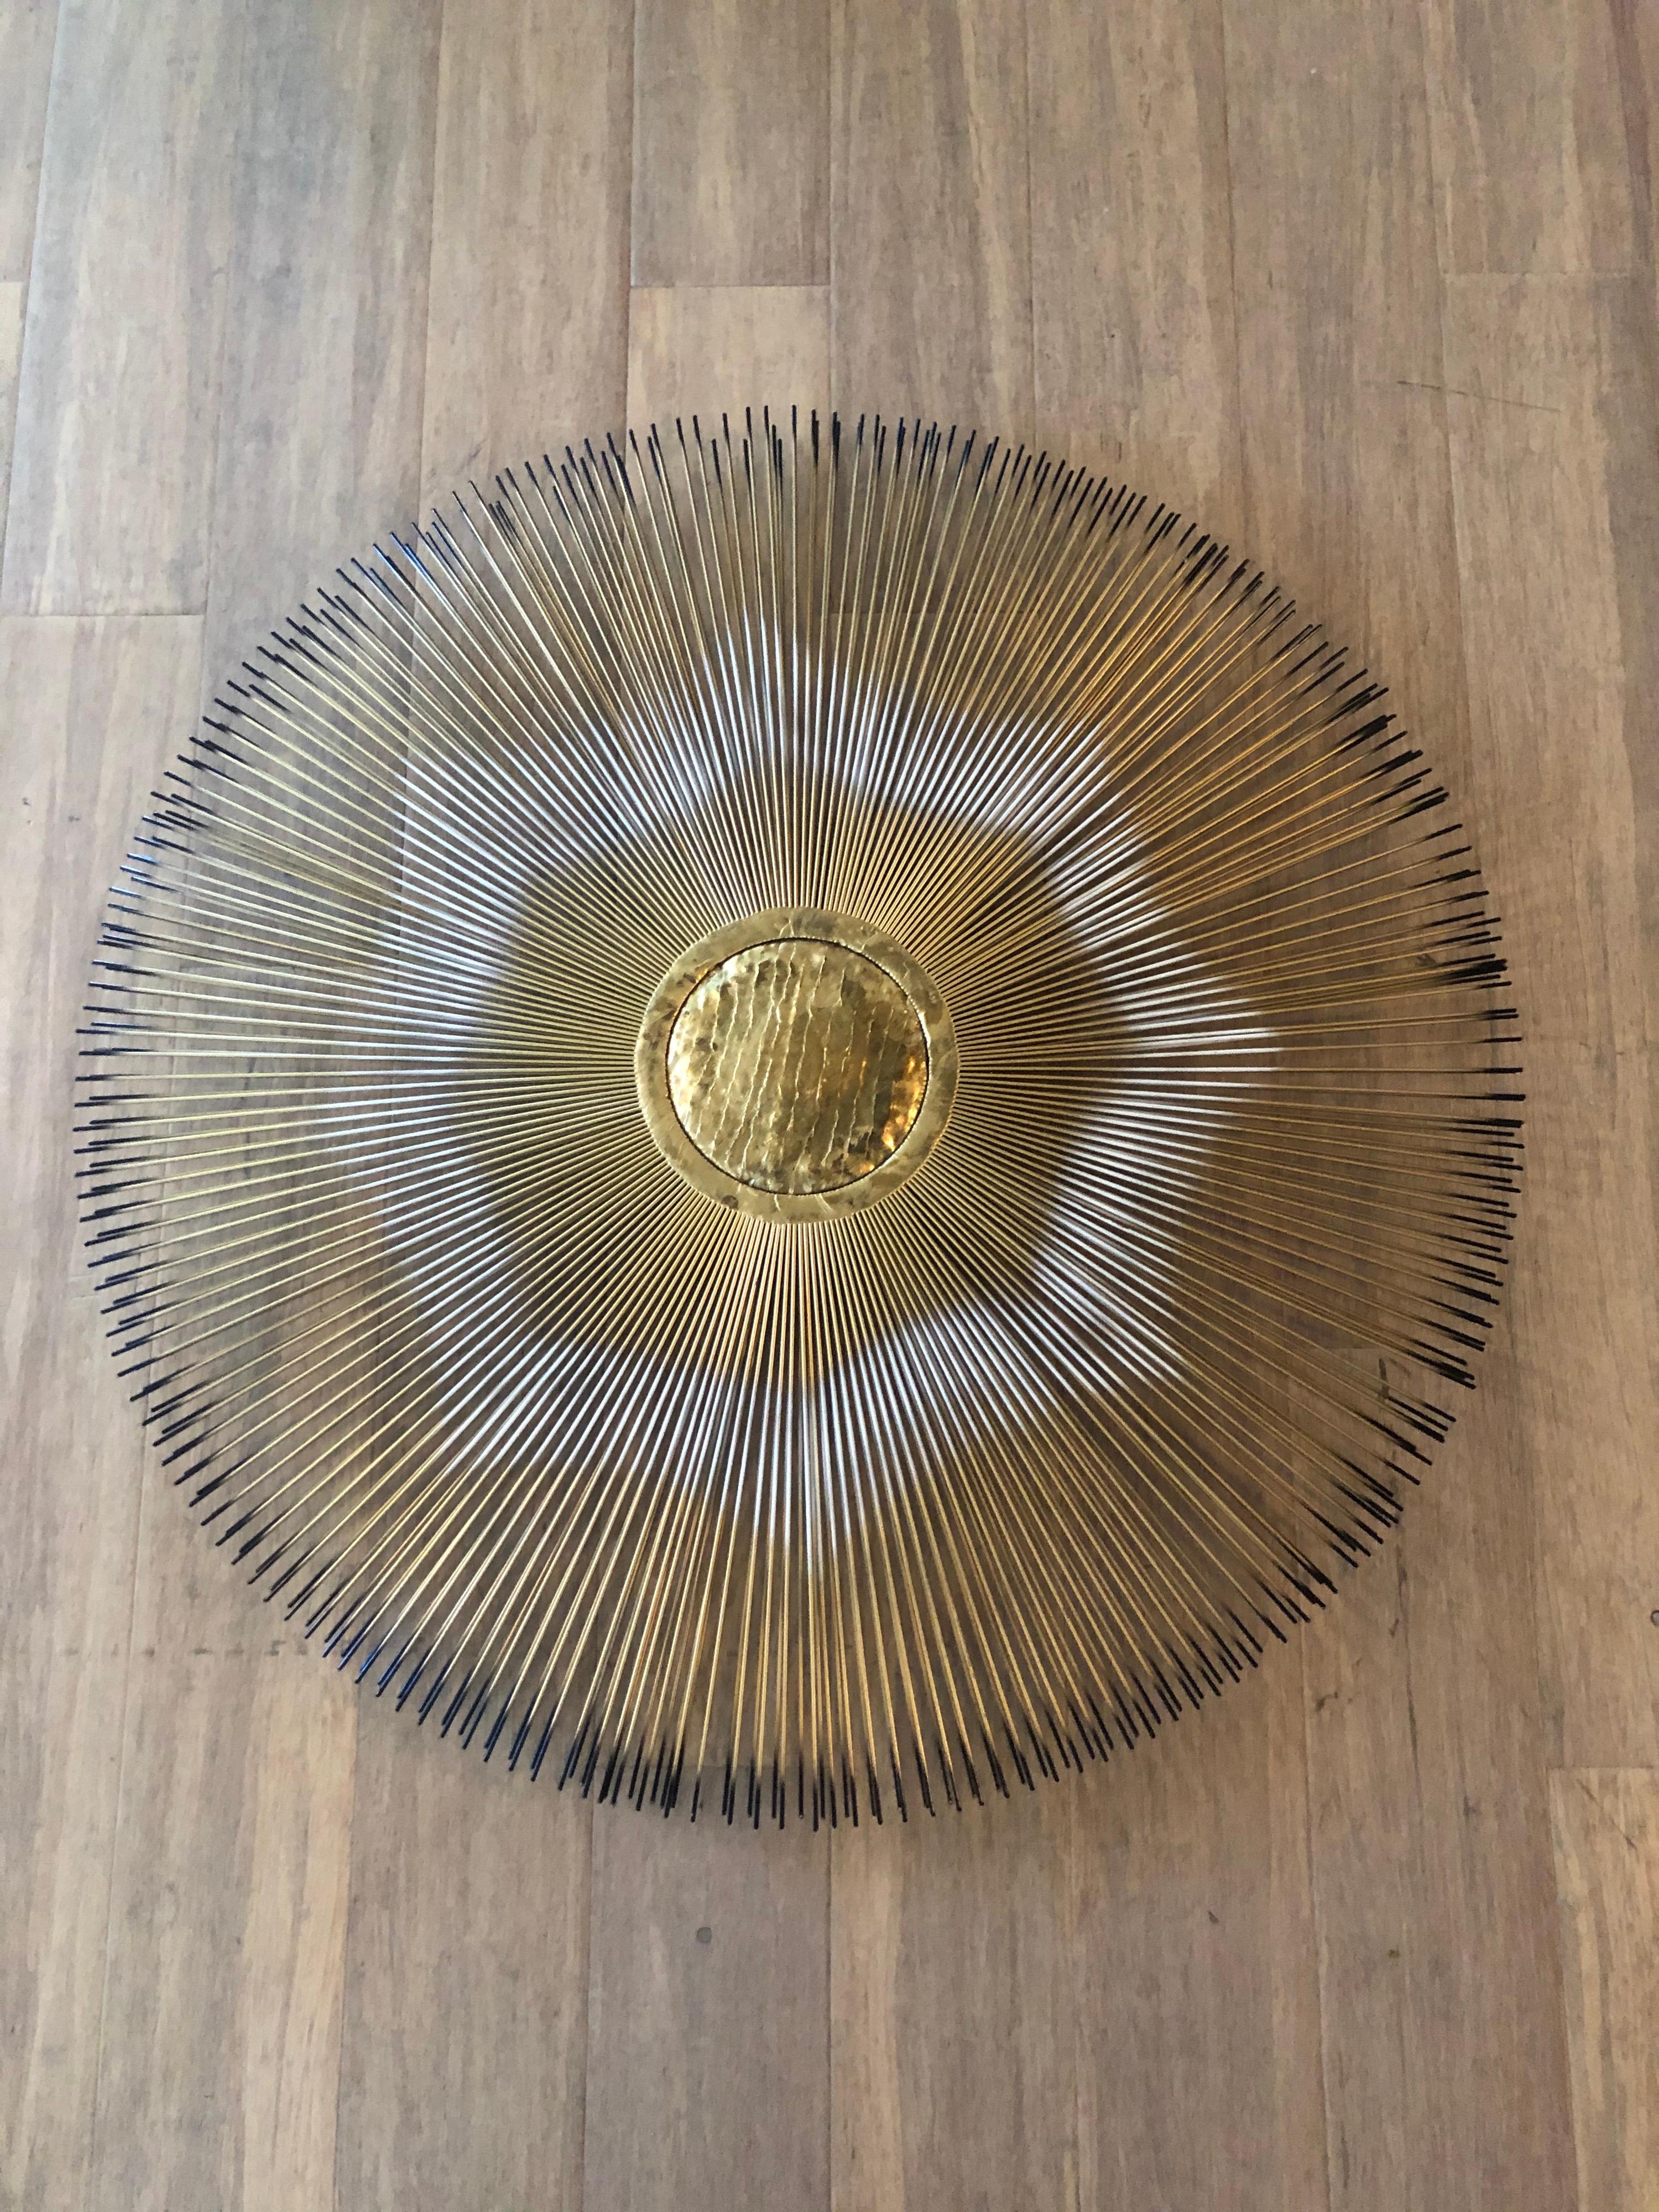 1970's Signed Casa Devall starburst wall sculpture. Quite a Glamourous statement piece . Mixing metals in with artwork is very in style right now. 